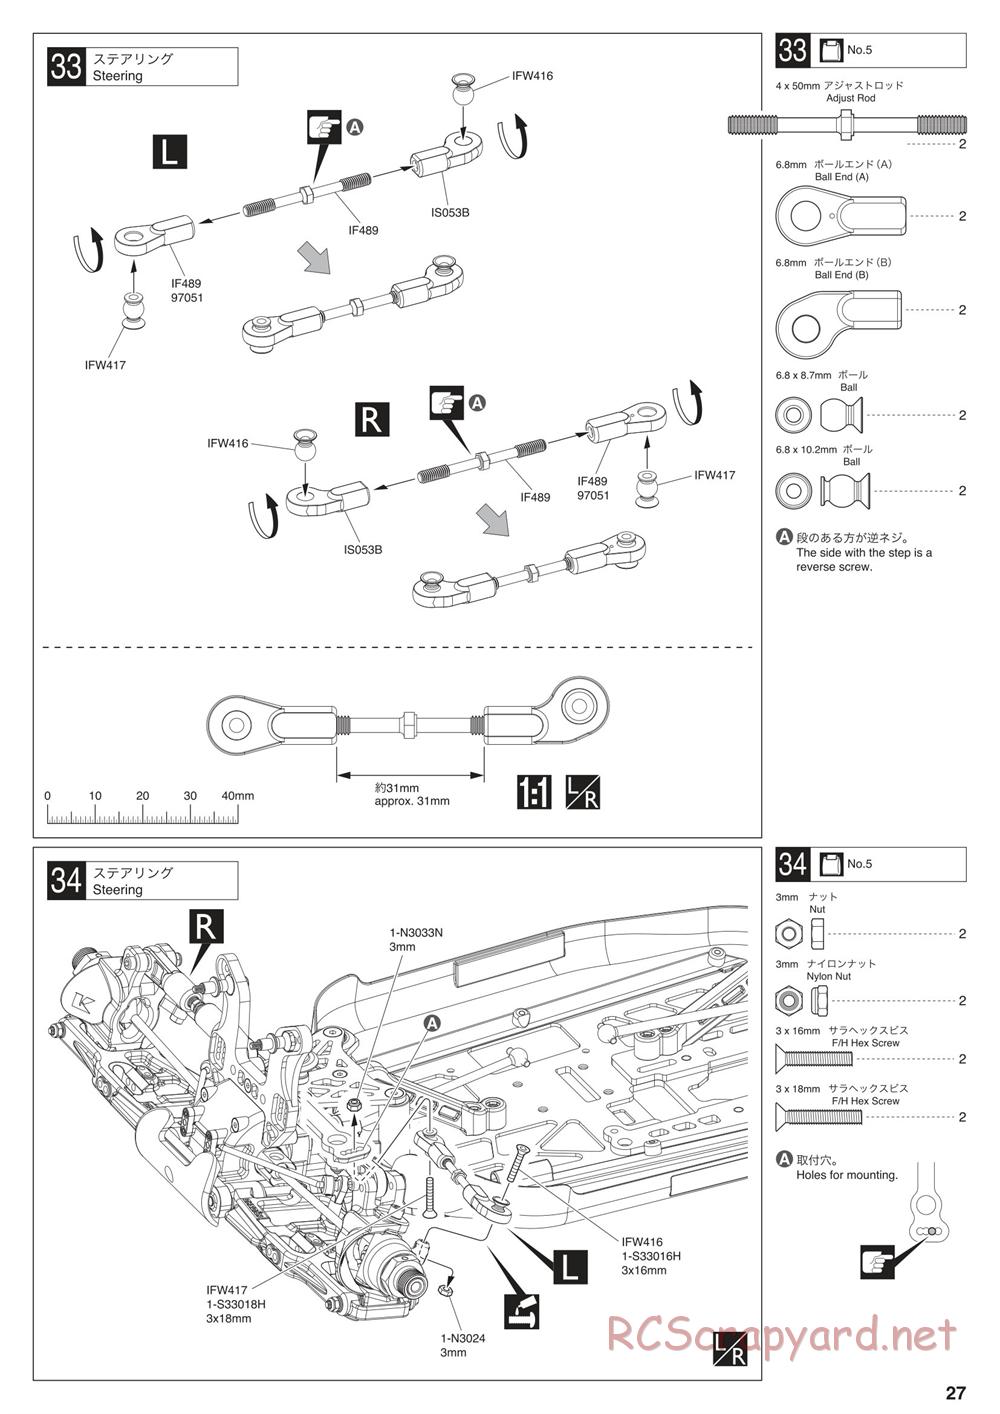 Kyosho - Inferno MP10 - Manual - Page 27